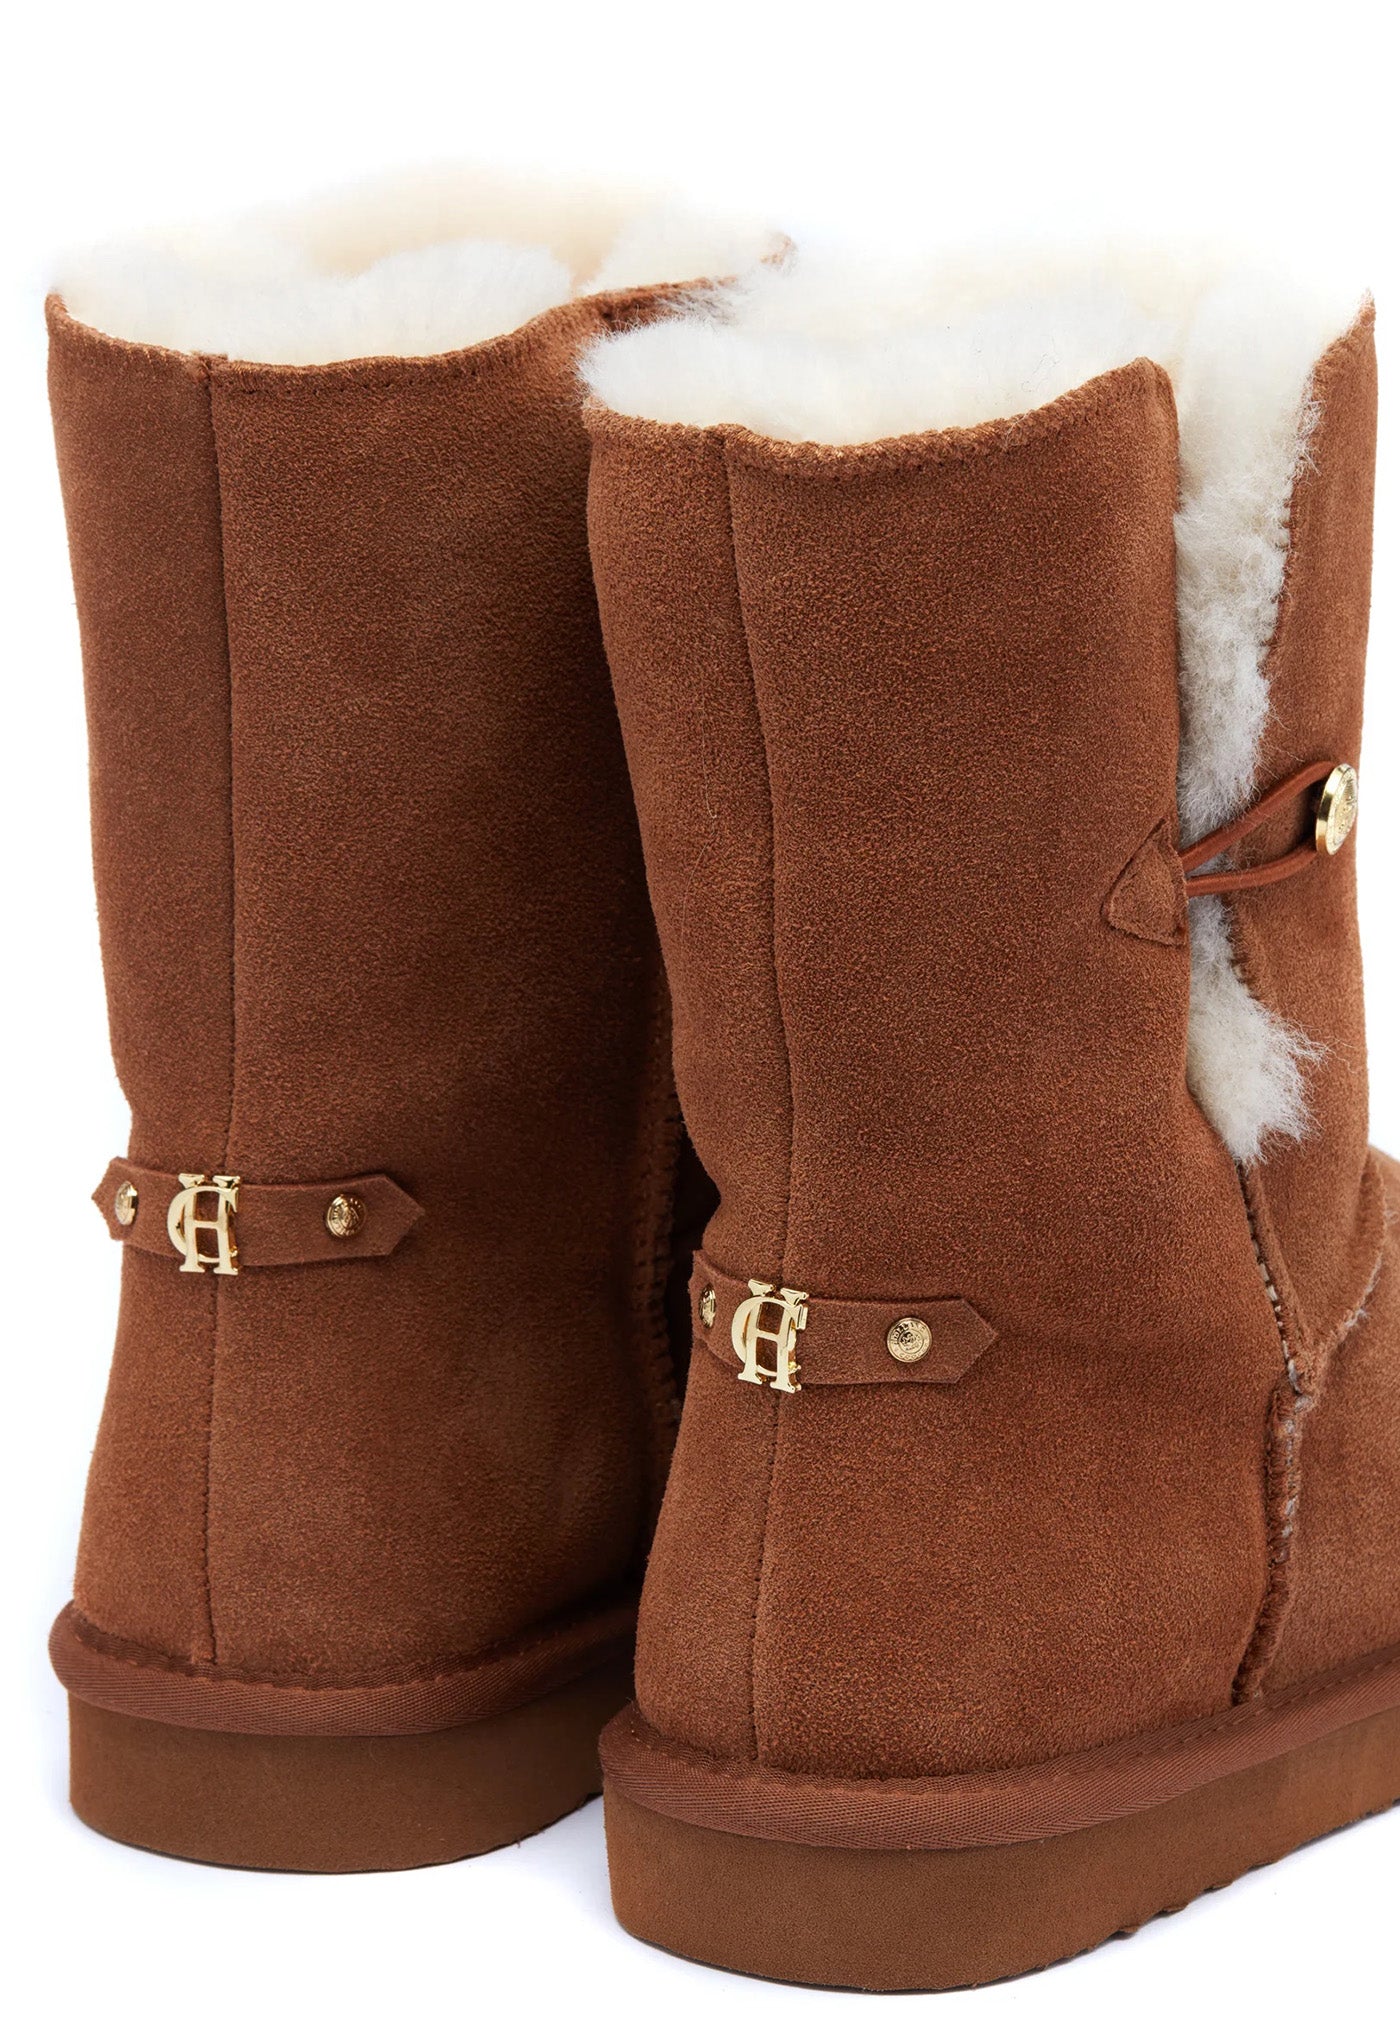 HC Shearling Boot - Tan sold by Angel Divine